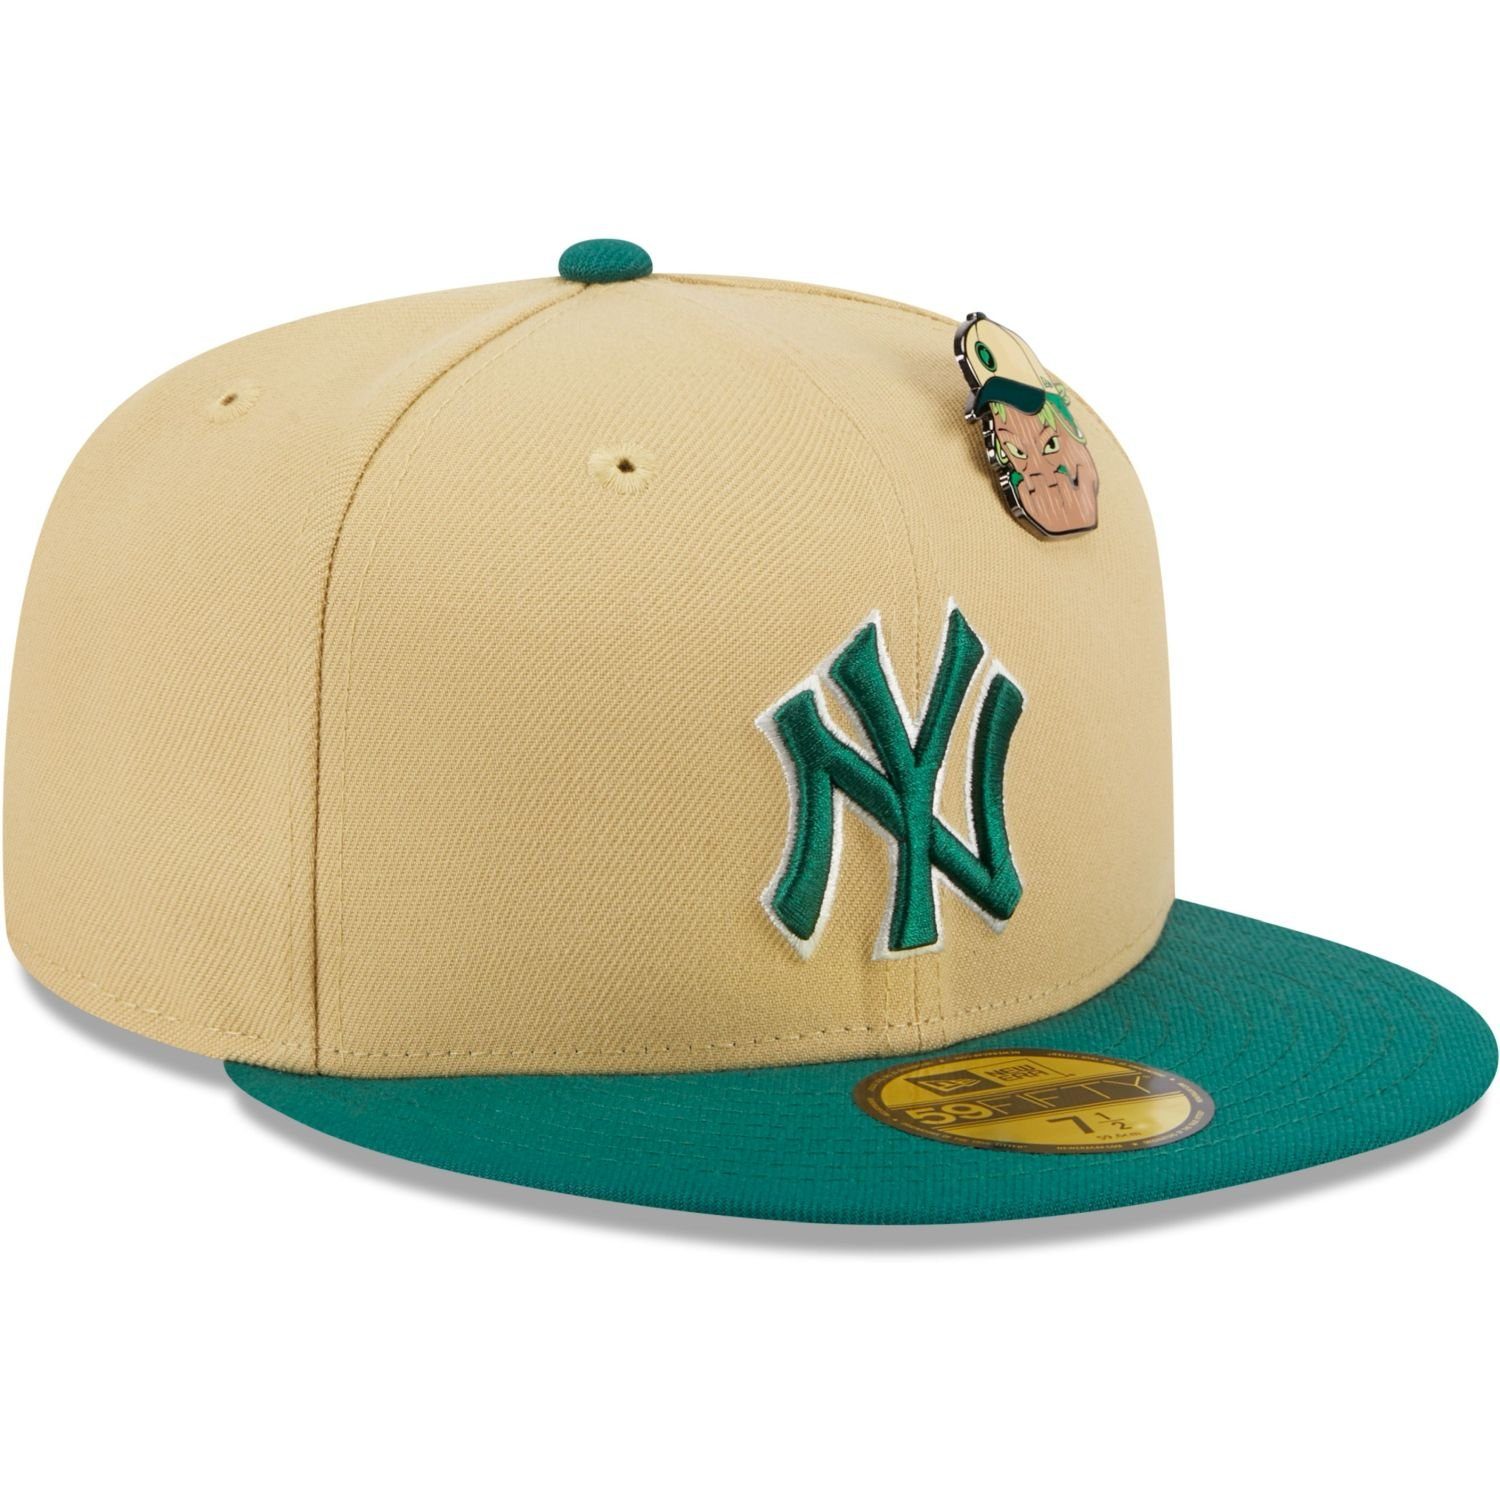 New PIN York Era Cap Fitted ELEMENTS 59Fifty New Yankees